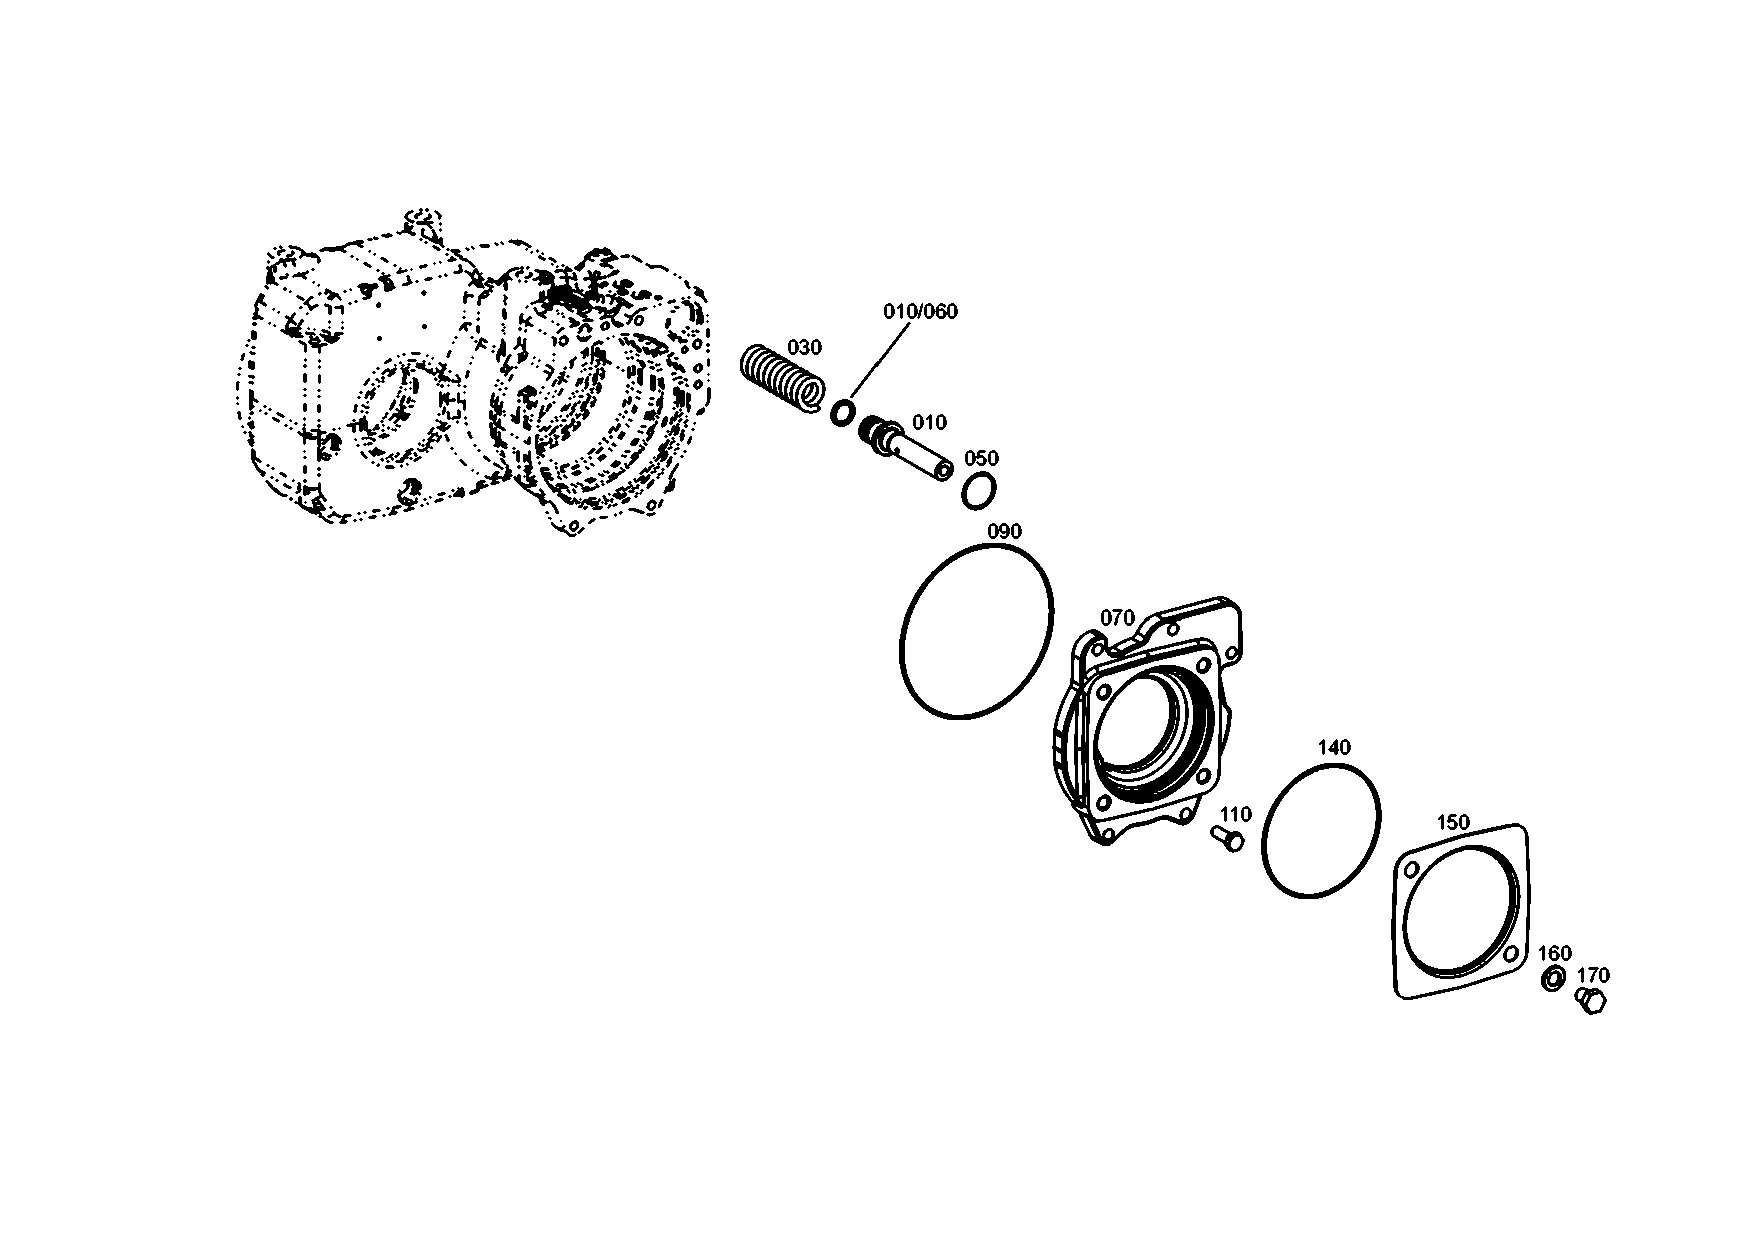 drawing for E. N. M. T. P. / CPG 0732 042 890 - COMPRESSION SPRING (figure 3)